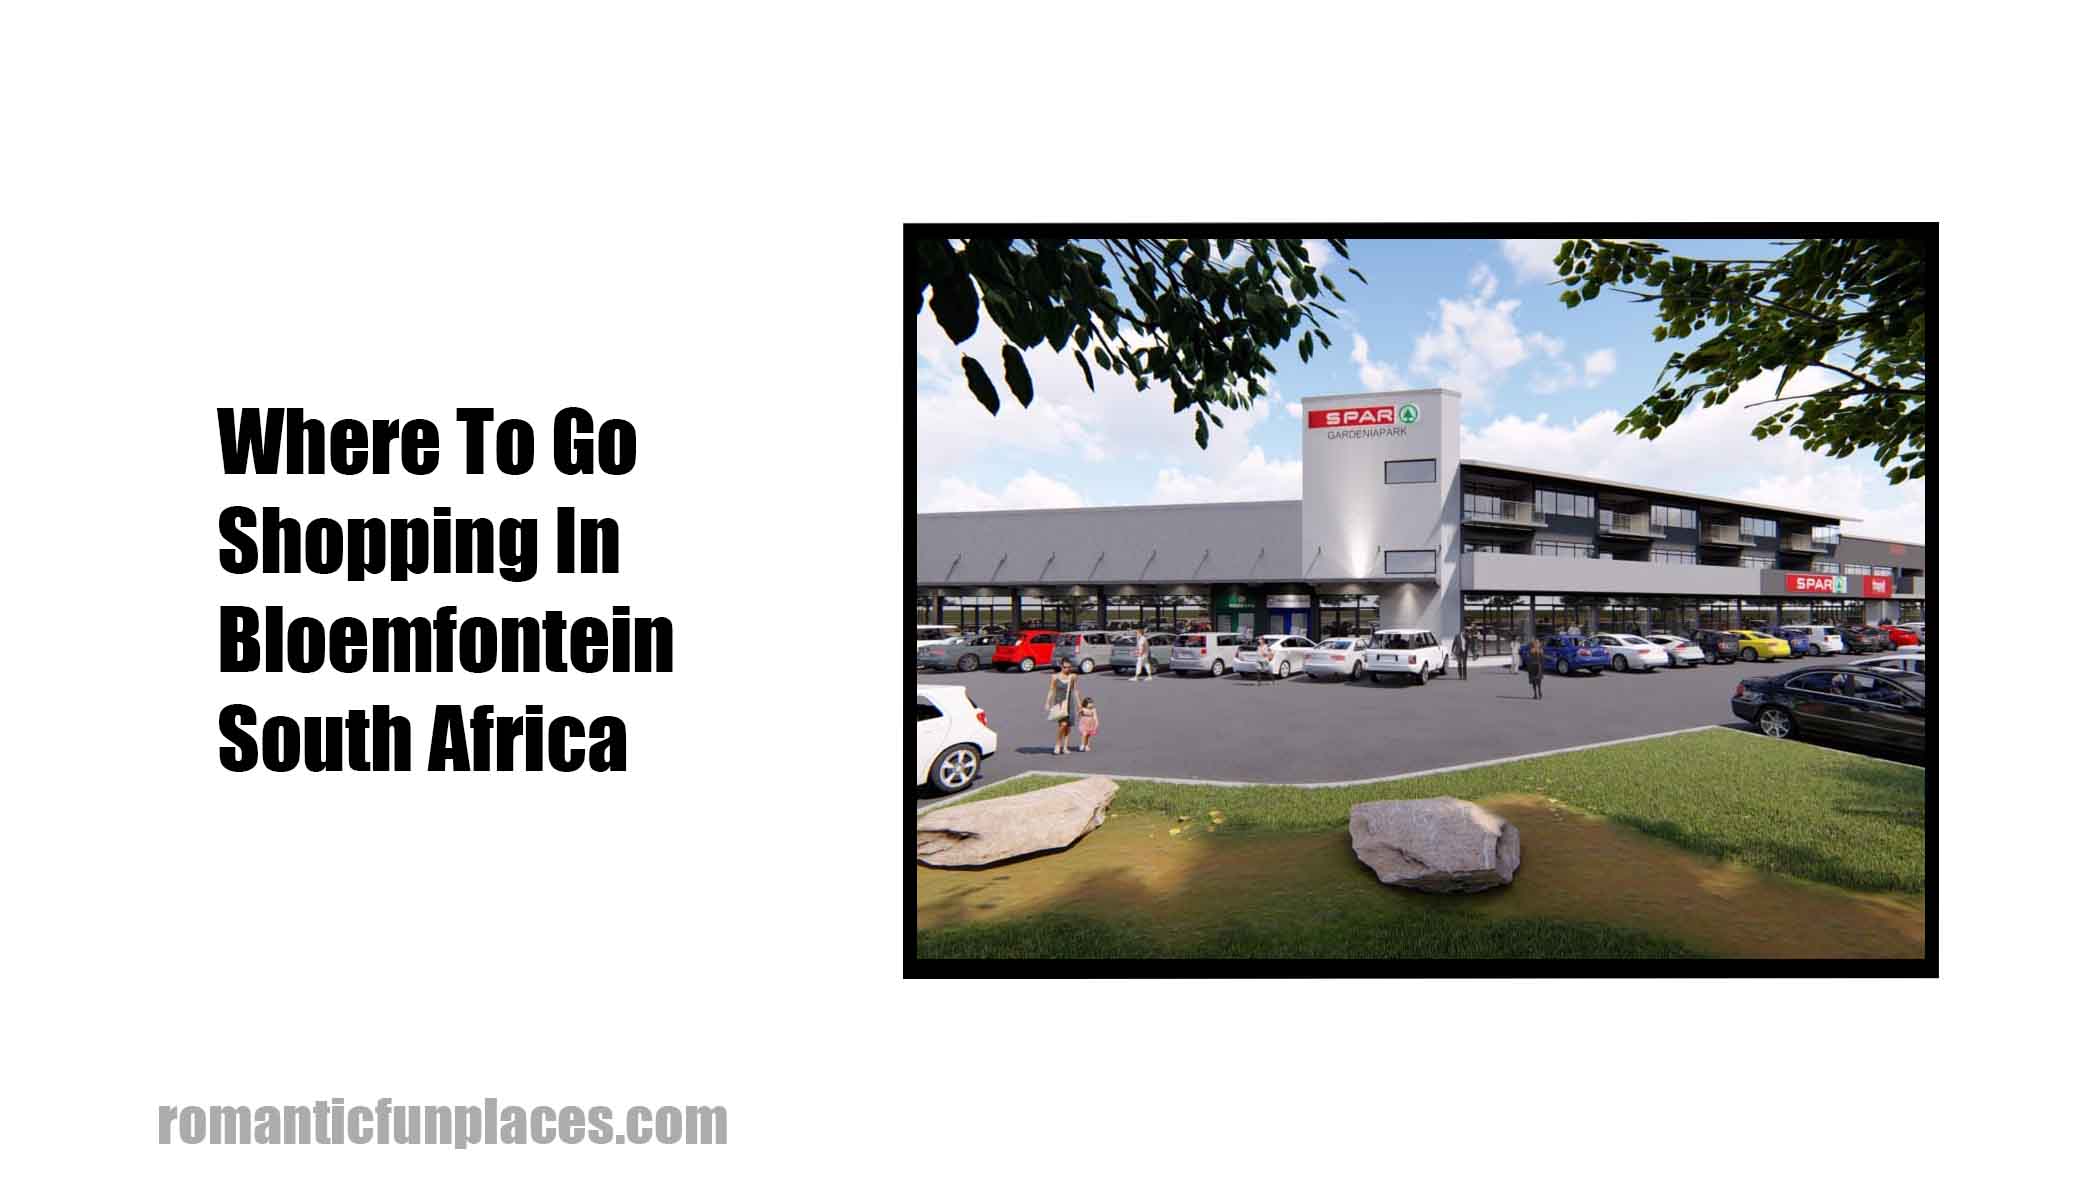 Where To Go Shopping In Bloemfontein South Africa